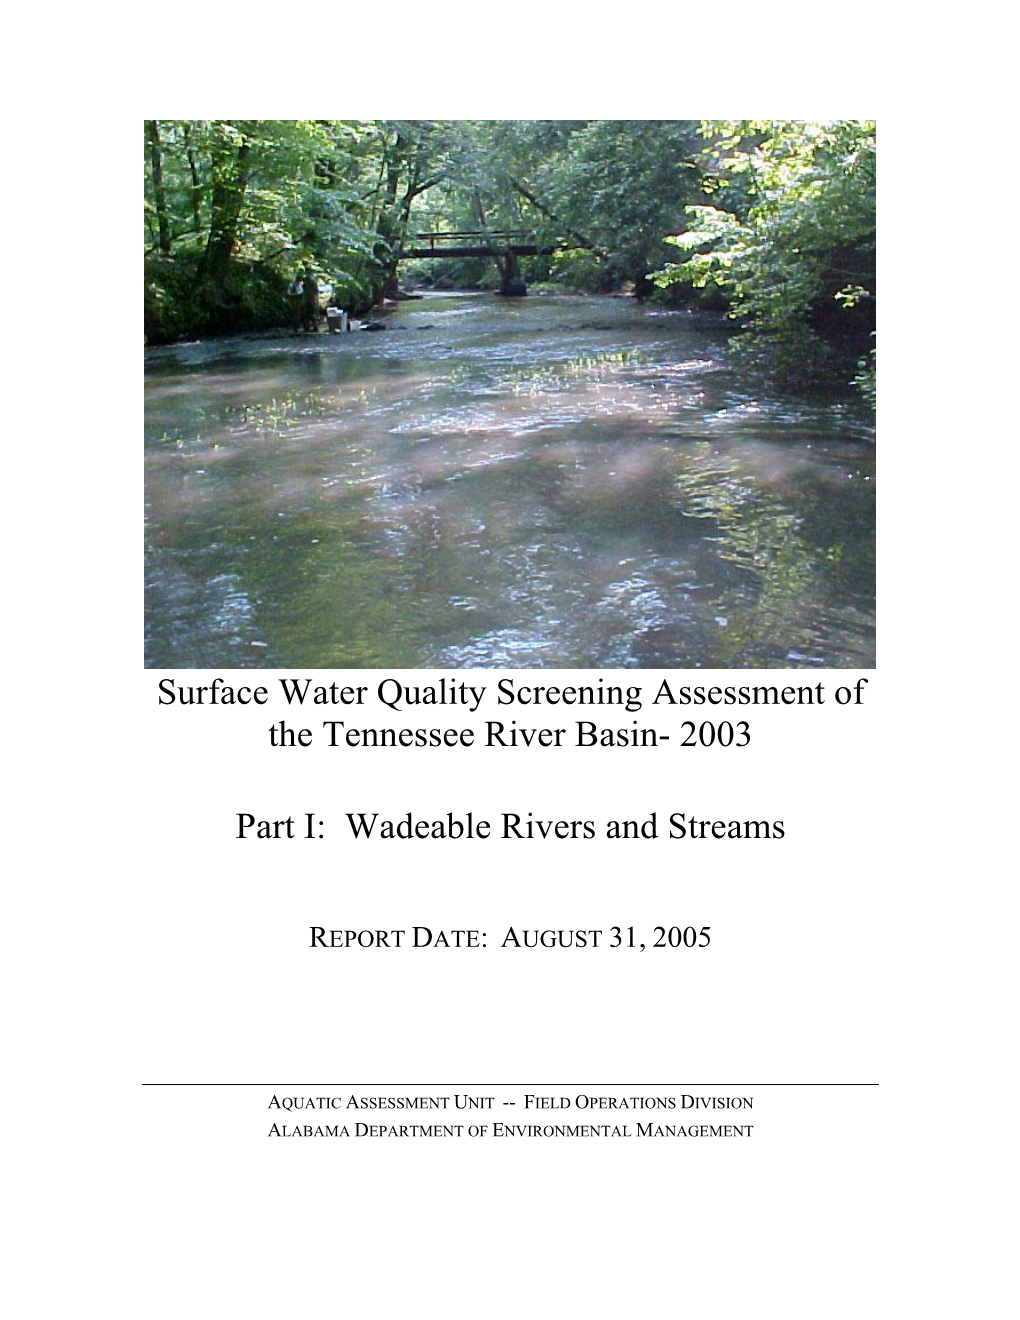 Surface Water Quality Screening Assessment of the Tennessee River Basin- 2003